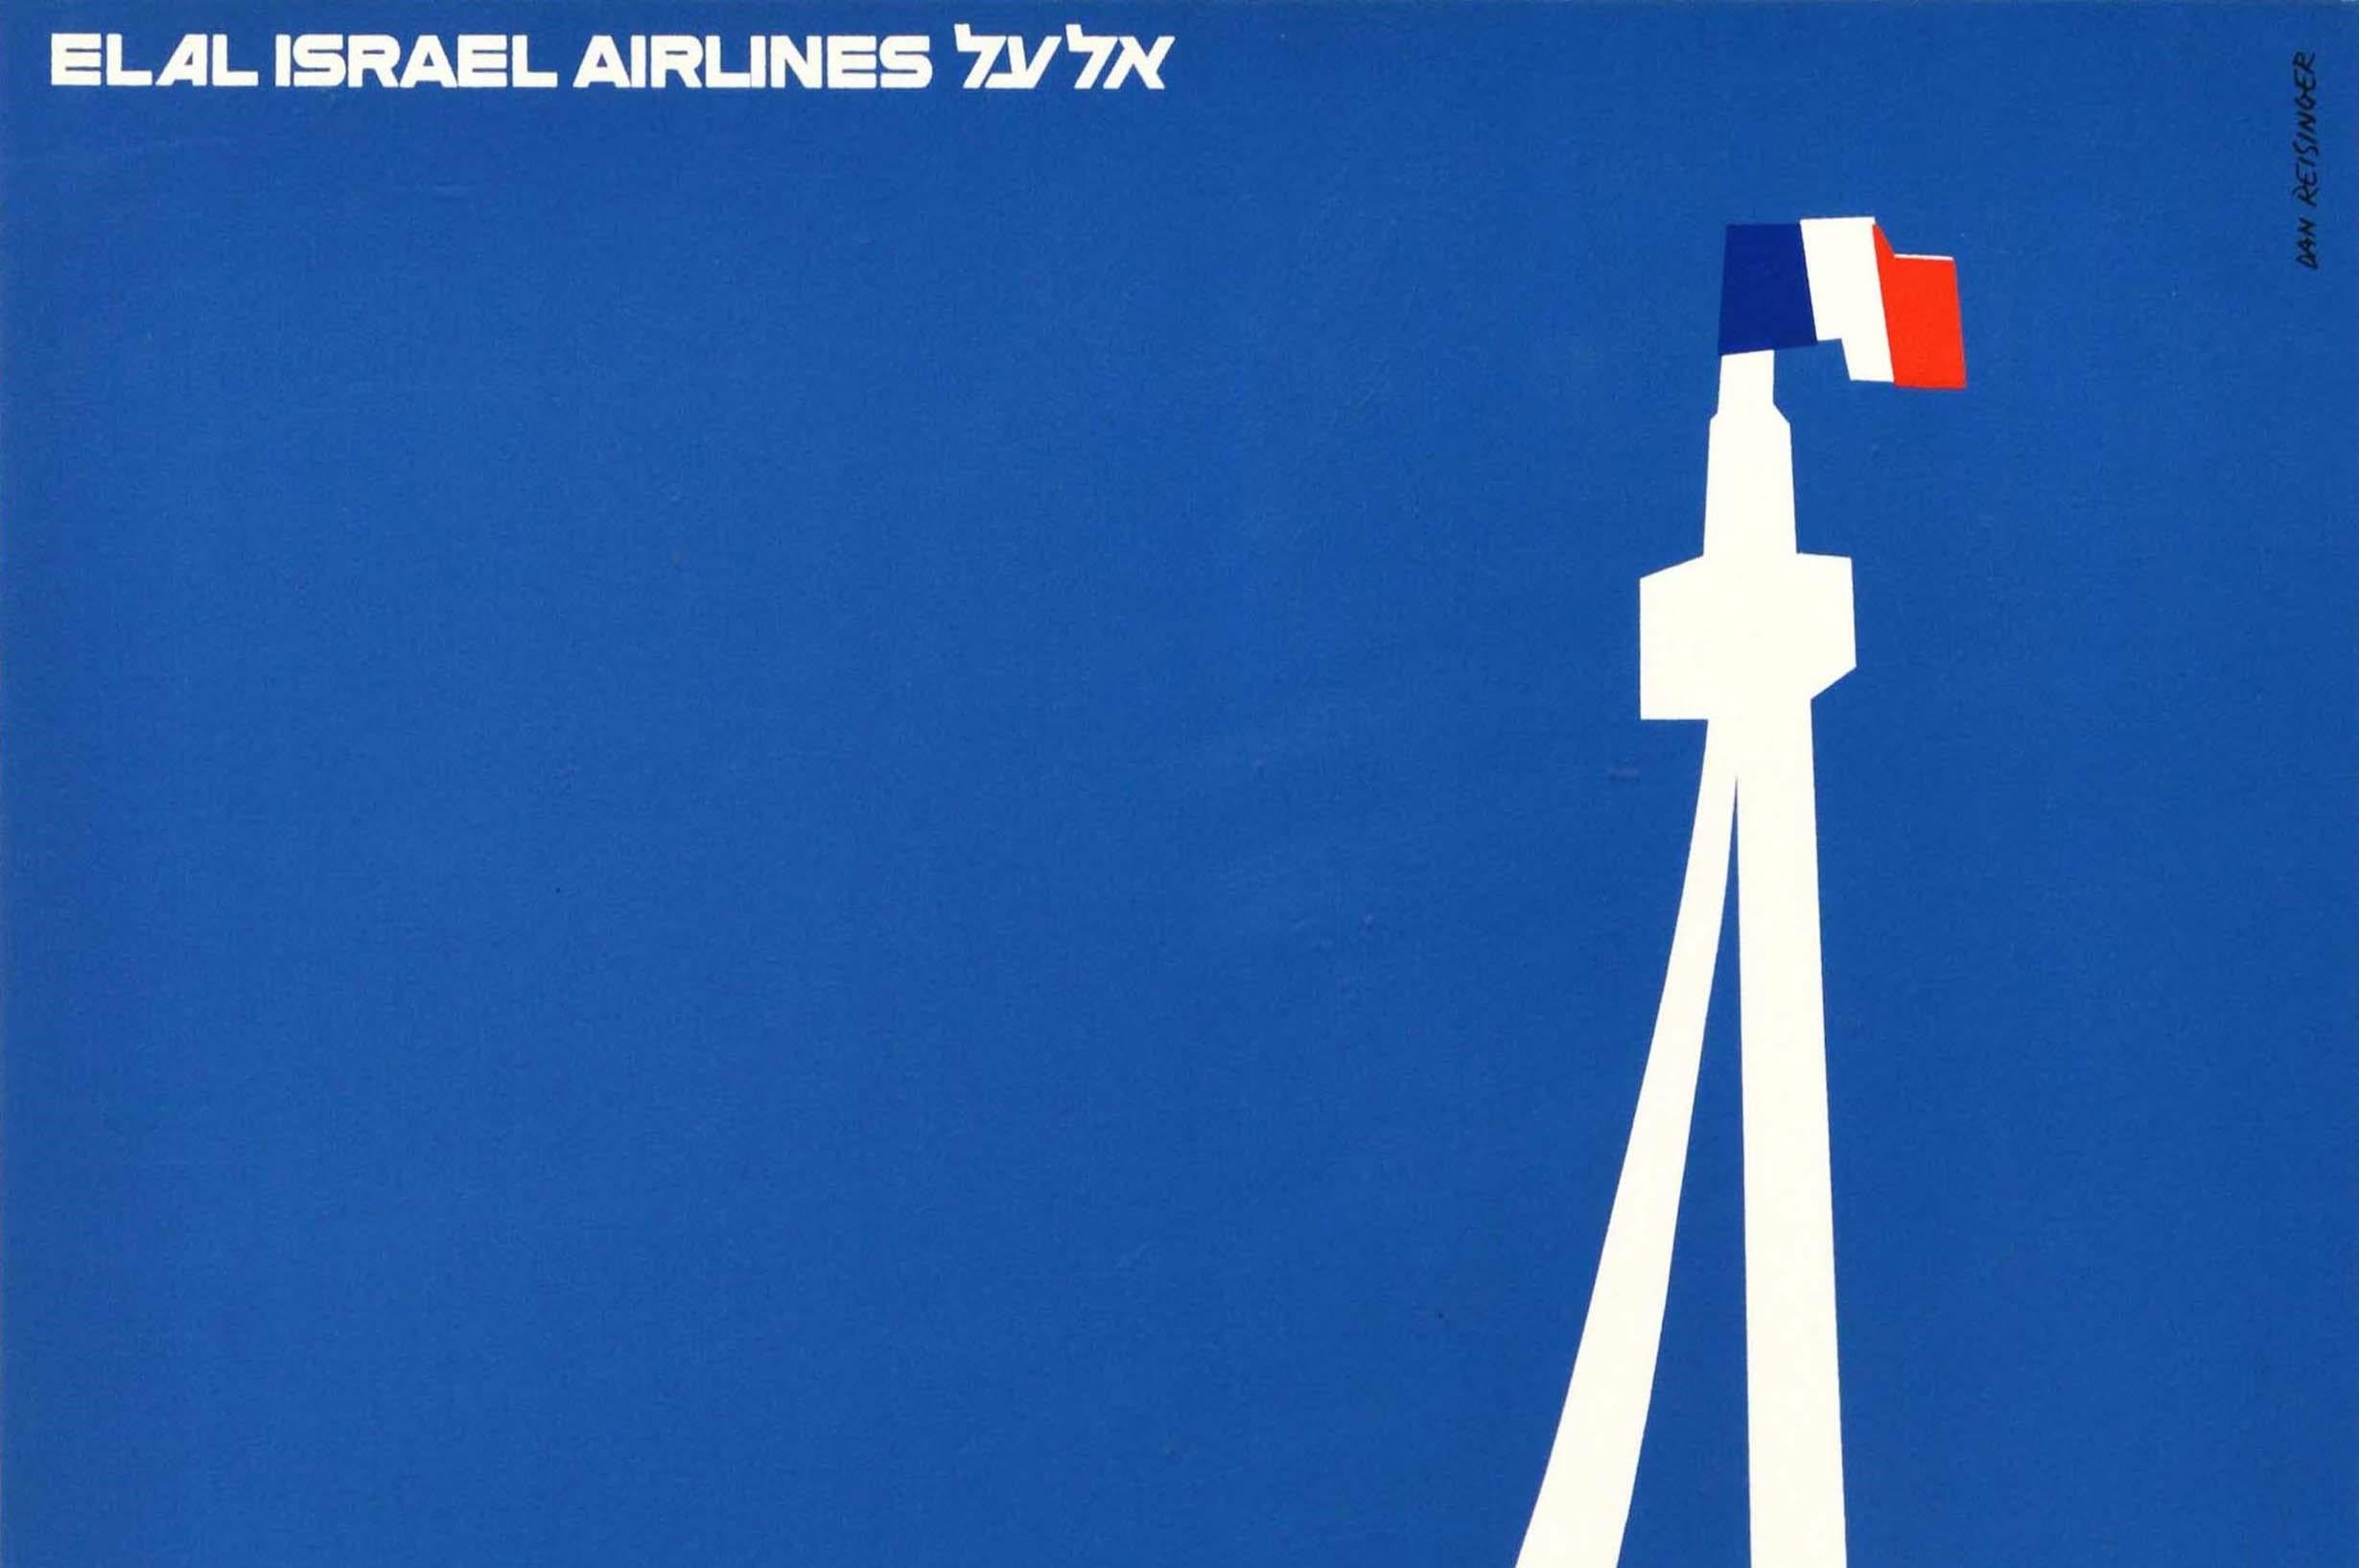 Original vintage travel poster issued by El Al Israel Airlines for Paris France featuring a great graphic design by the notable Israeli artist Dan Reisinger (1934-2019) depicting the bold black lettering of El Al with the Eiffel Tower as the letter